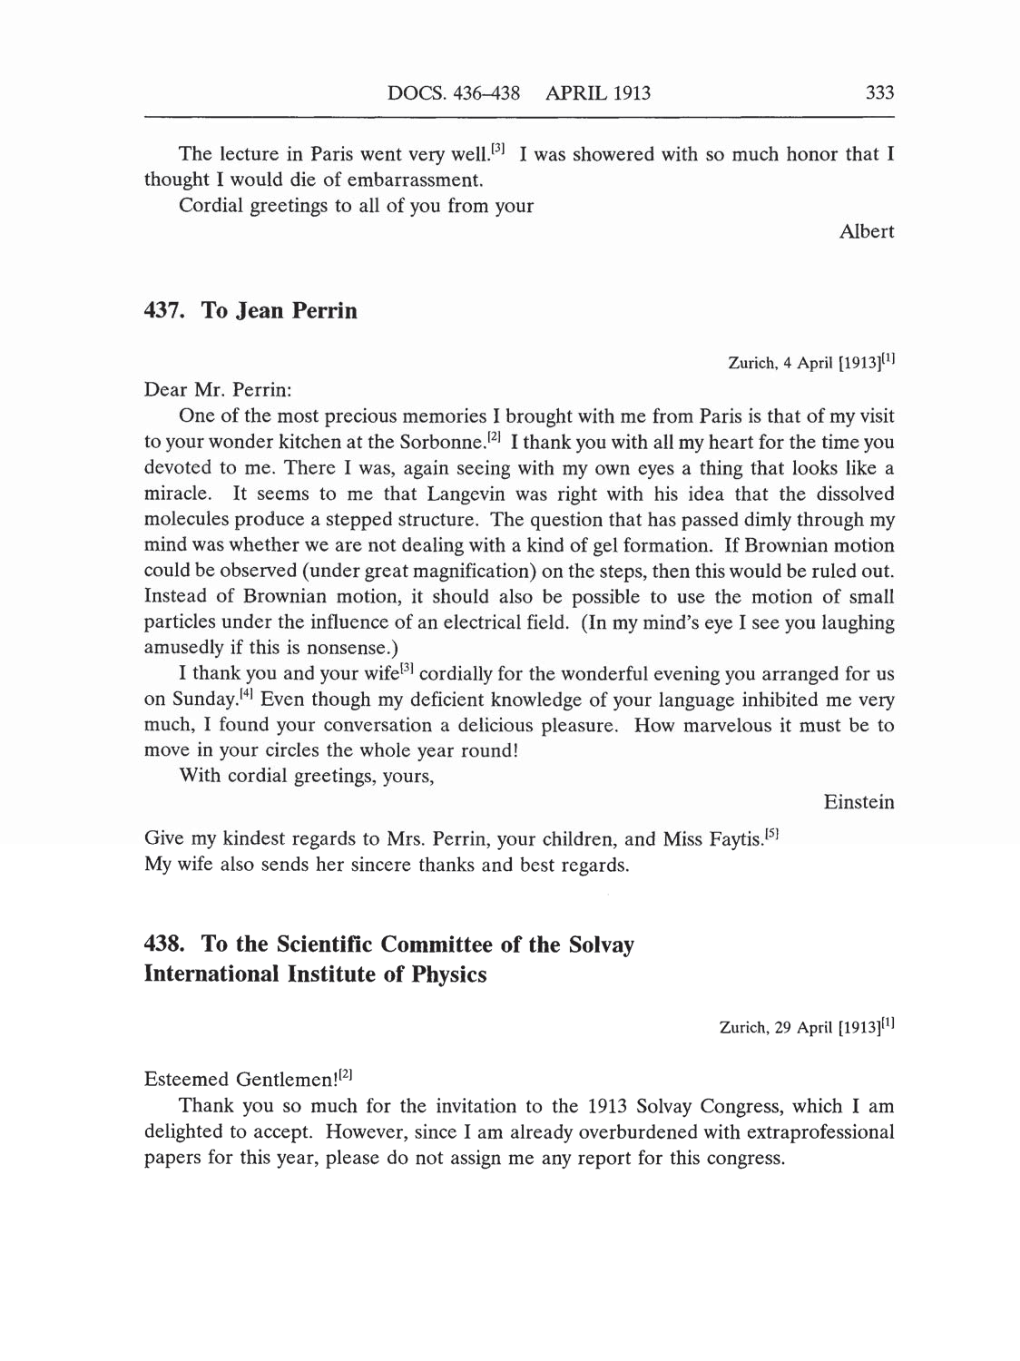 Volume 5: The Swiss Years: Correspondence, 1902-1914 (English translation supplement) page 333